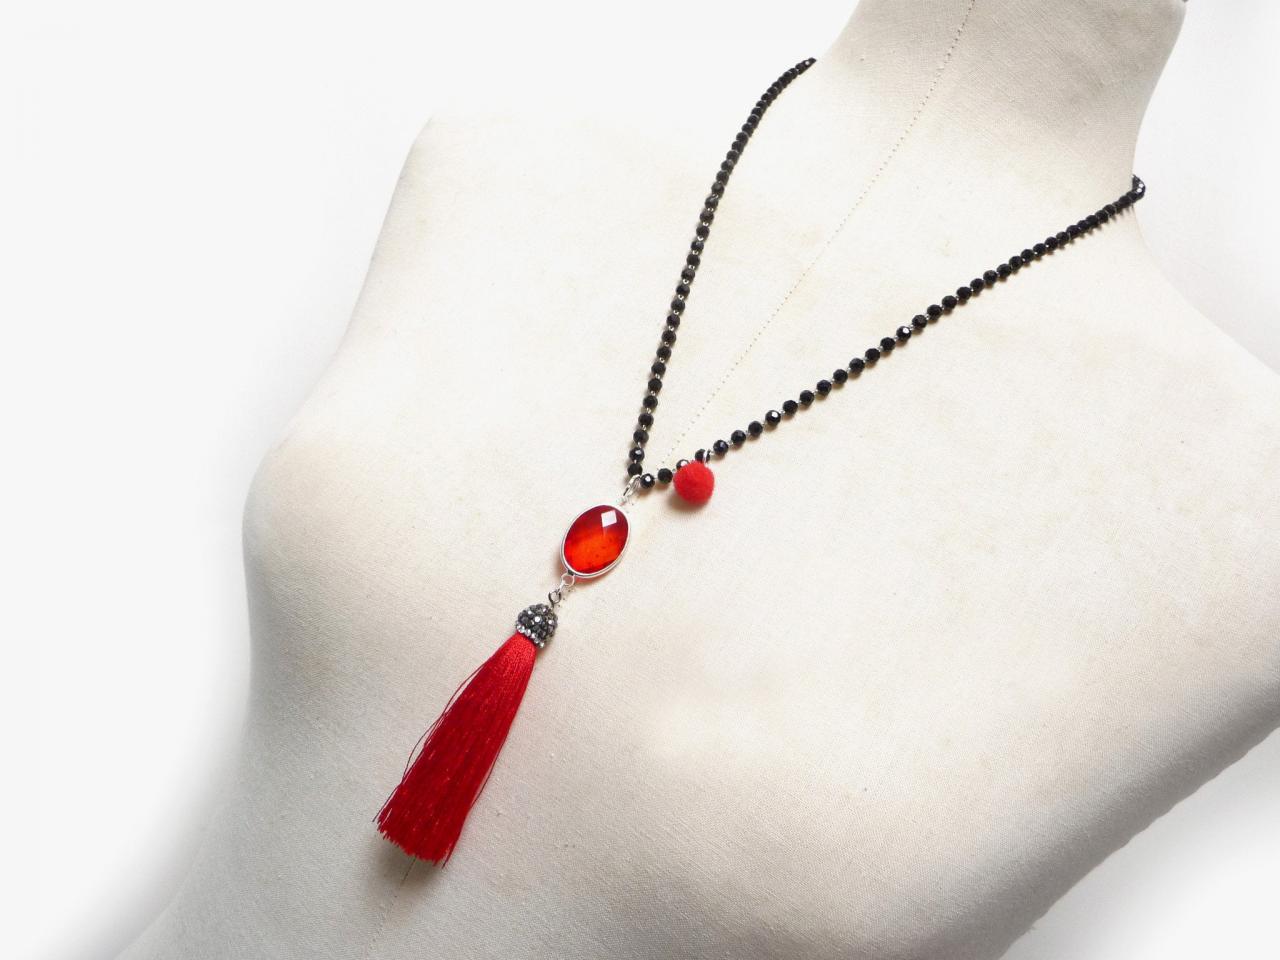 Red Tassel Necklace With Black Beaded Chain - Crystals Chain And Tassel Pendant With Red Focal Stone - Boho Chic Jewelry, Rosary Necklace